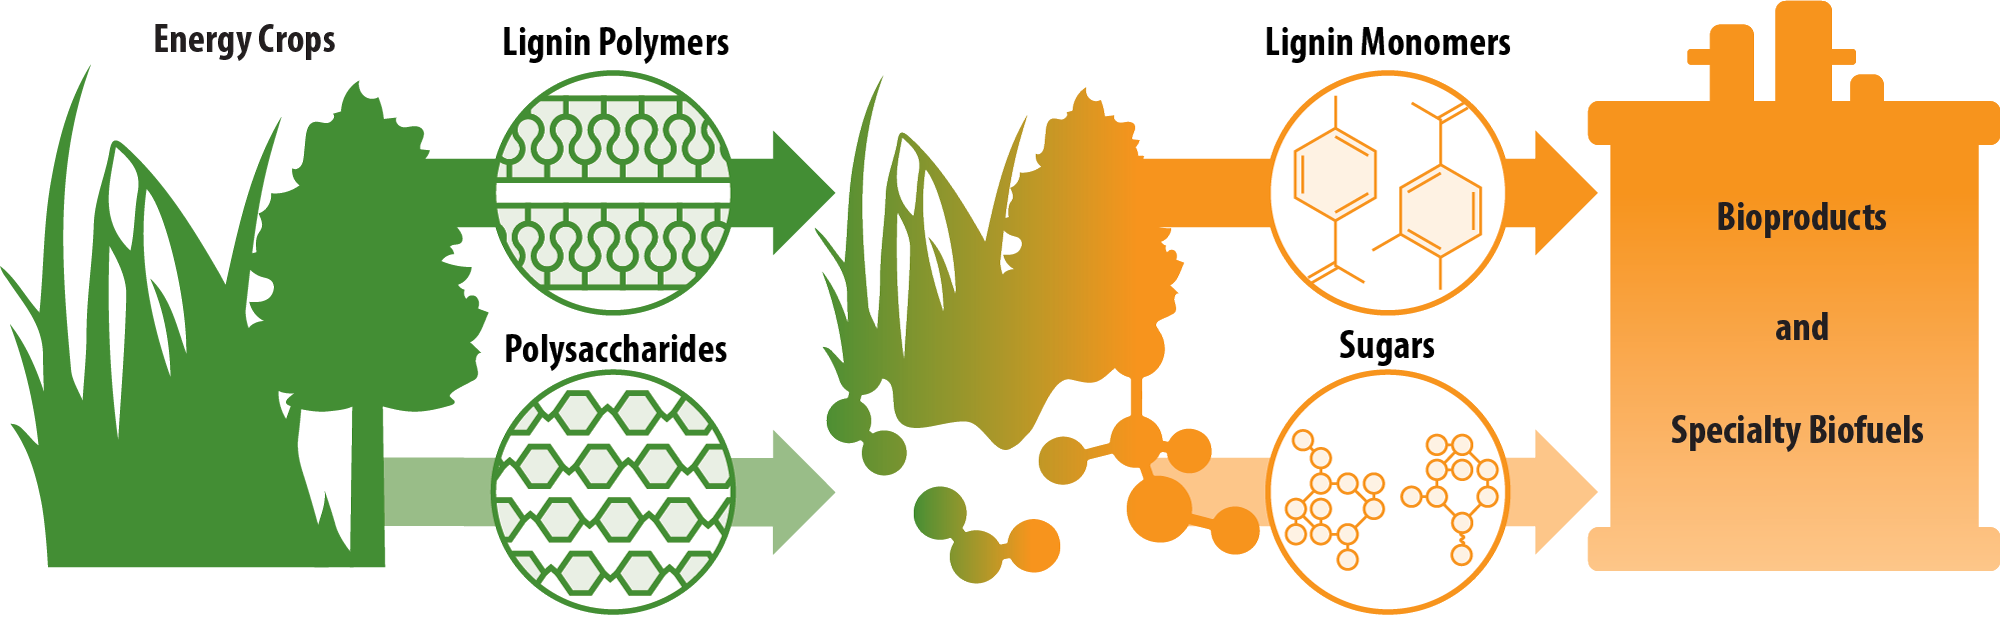 Cellulose to Biofuels and Bioproducts